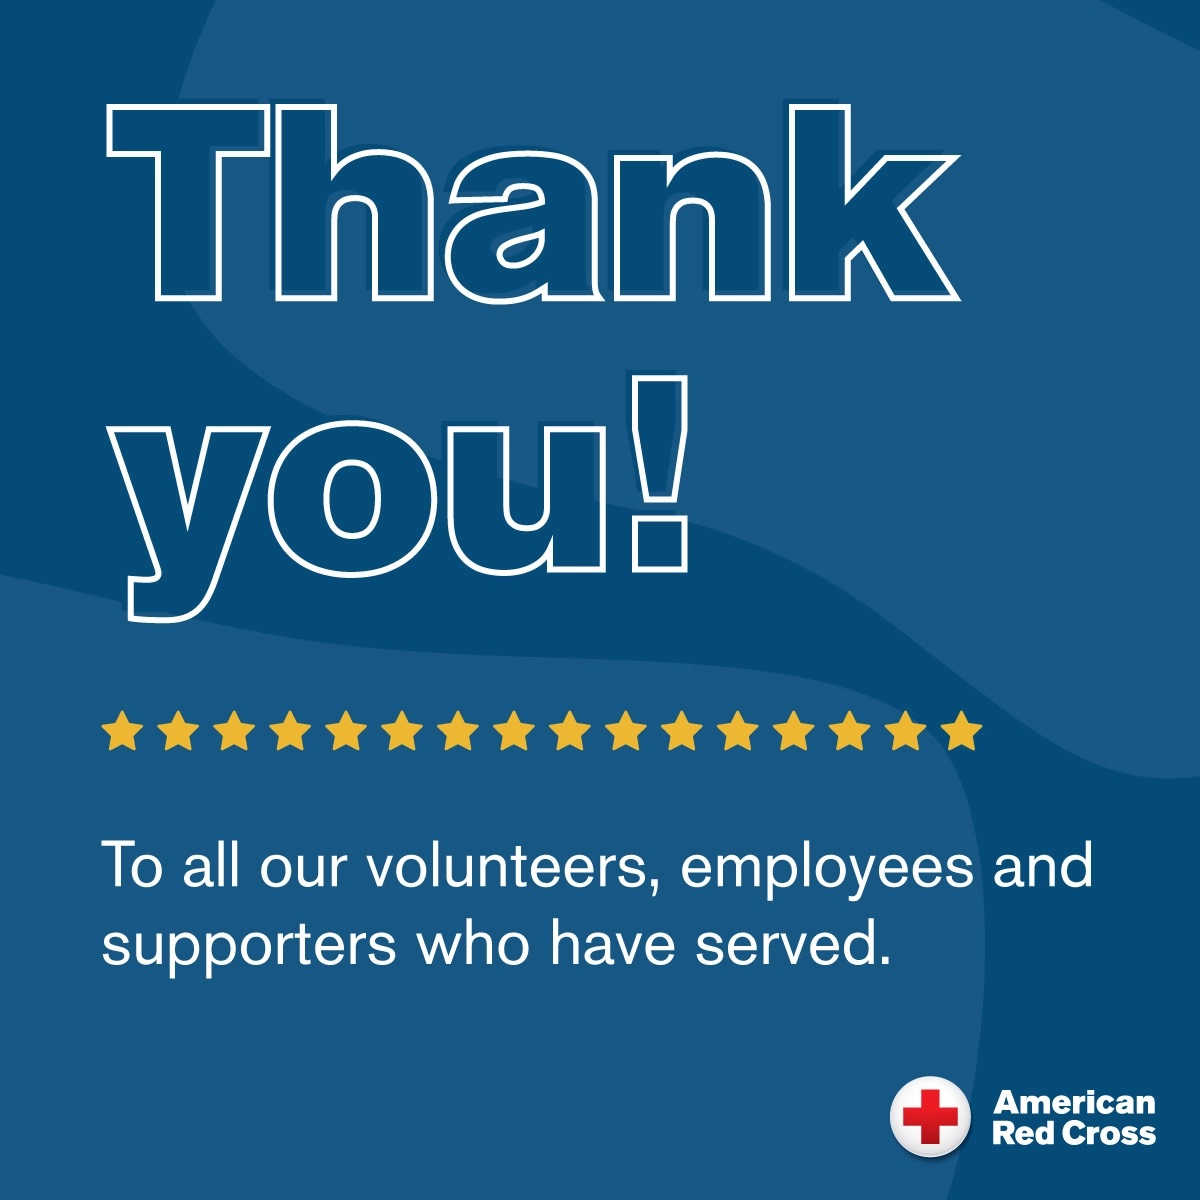 As we say mahalo to our volunteers this month, we want to give a special thanks to our veterans who volunteer to serve and our volunteers who serve our veterans. If you want to learn more about our Service to the Armed Forces and veterans, please visit redcross.org/hawaii